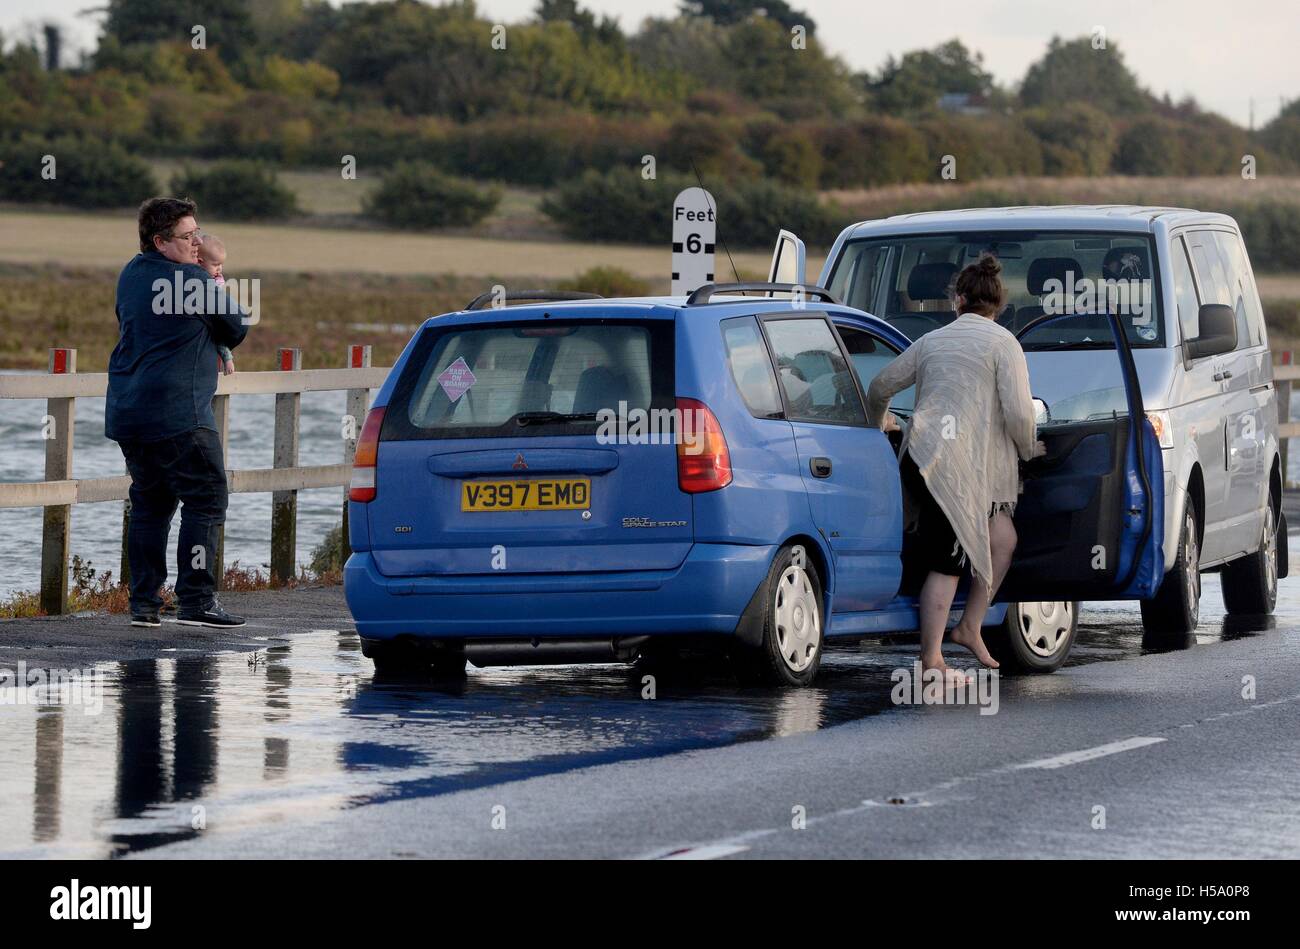 RETRANSMITTING ADDING CAPTION INFORMATION The male driver of the silver van (right) stops to help a lady and a baby from the blue car after it became stranded in the high tide on The Strood crossing between Mersea Island and mainland Essex. Stock Photo